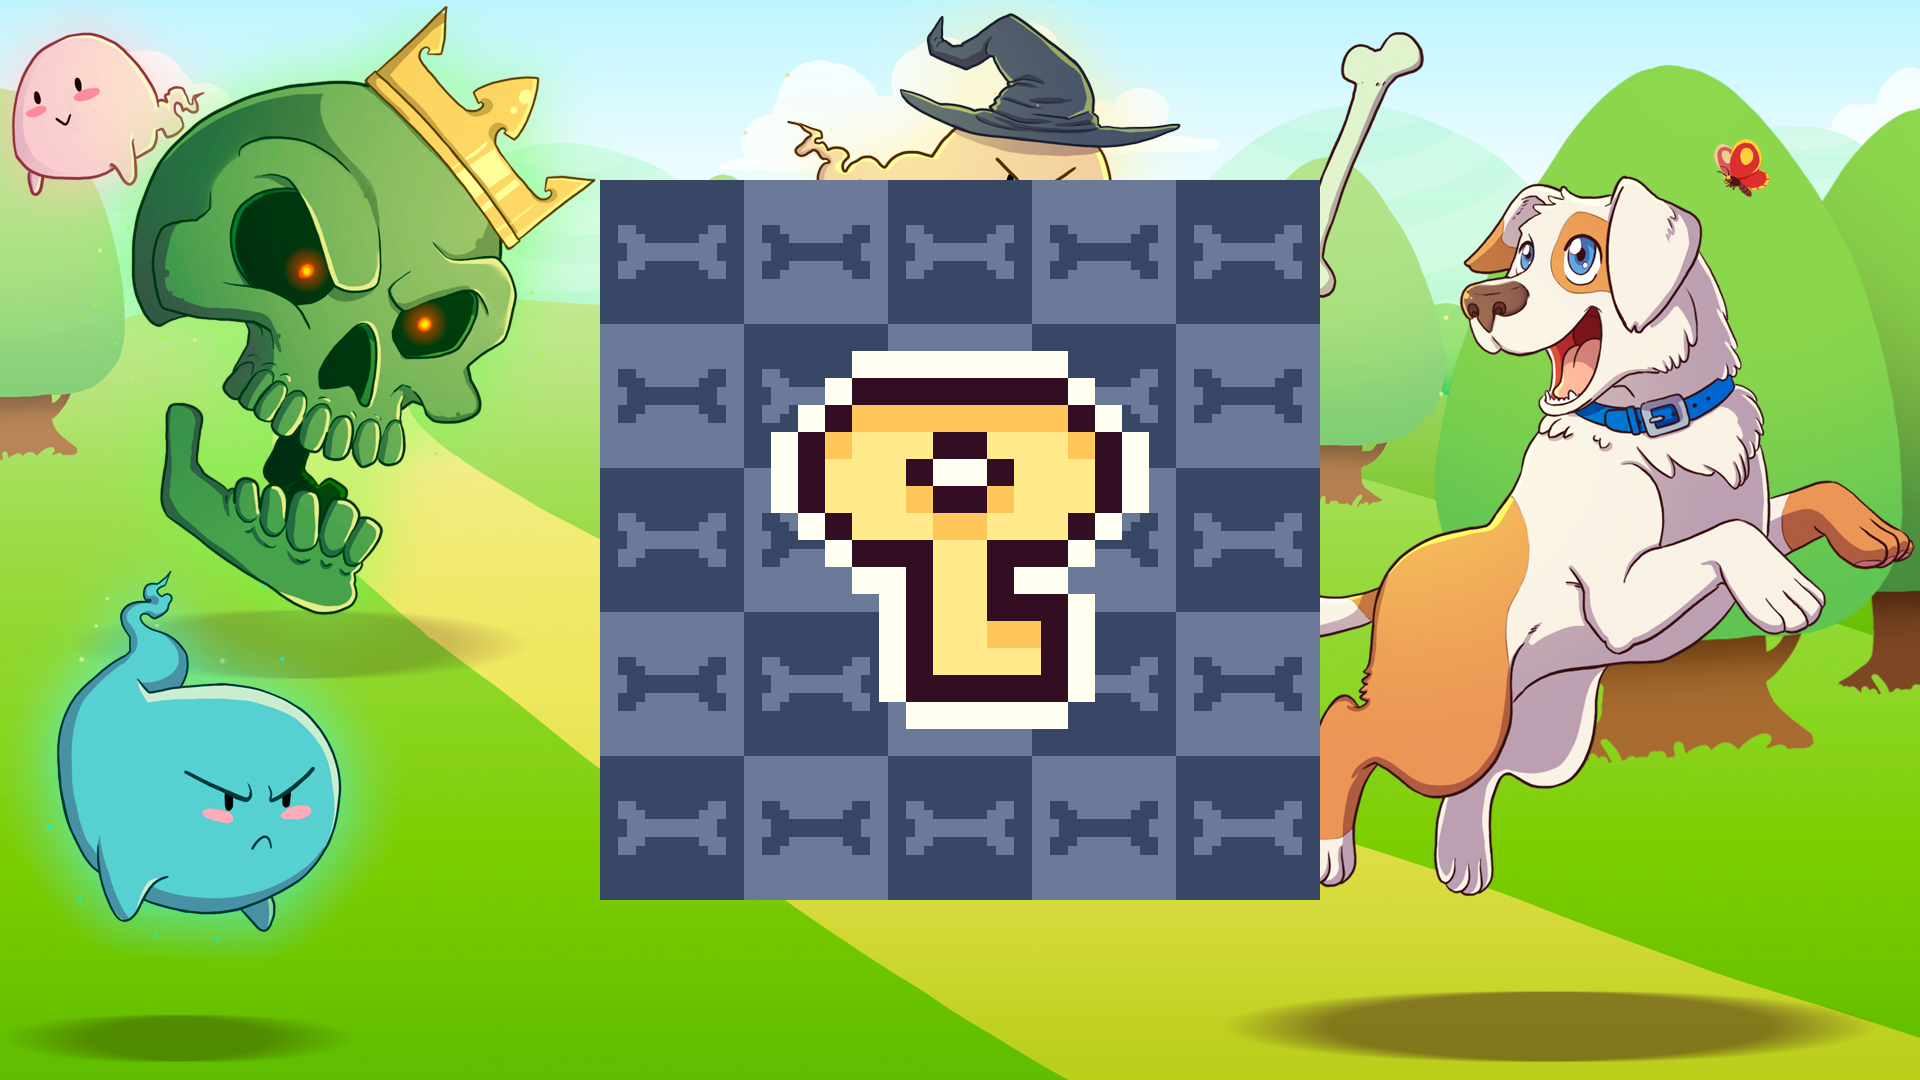 Icon for Keys also open chests